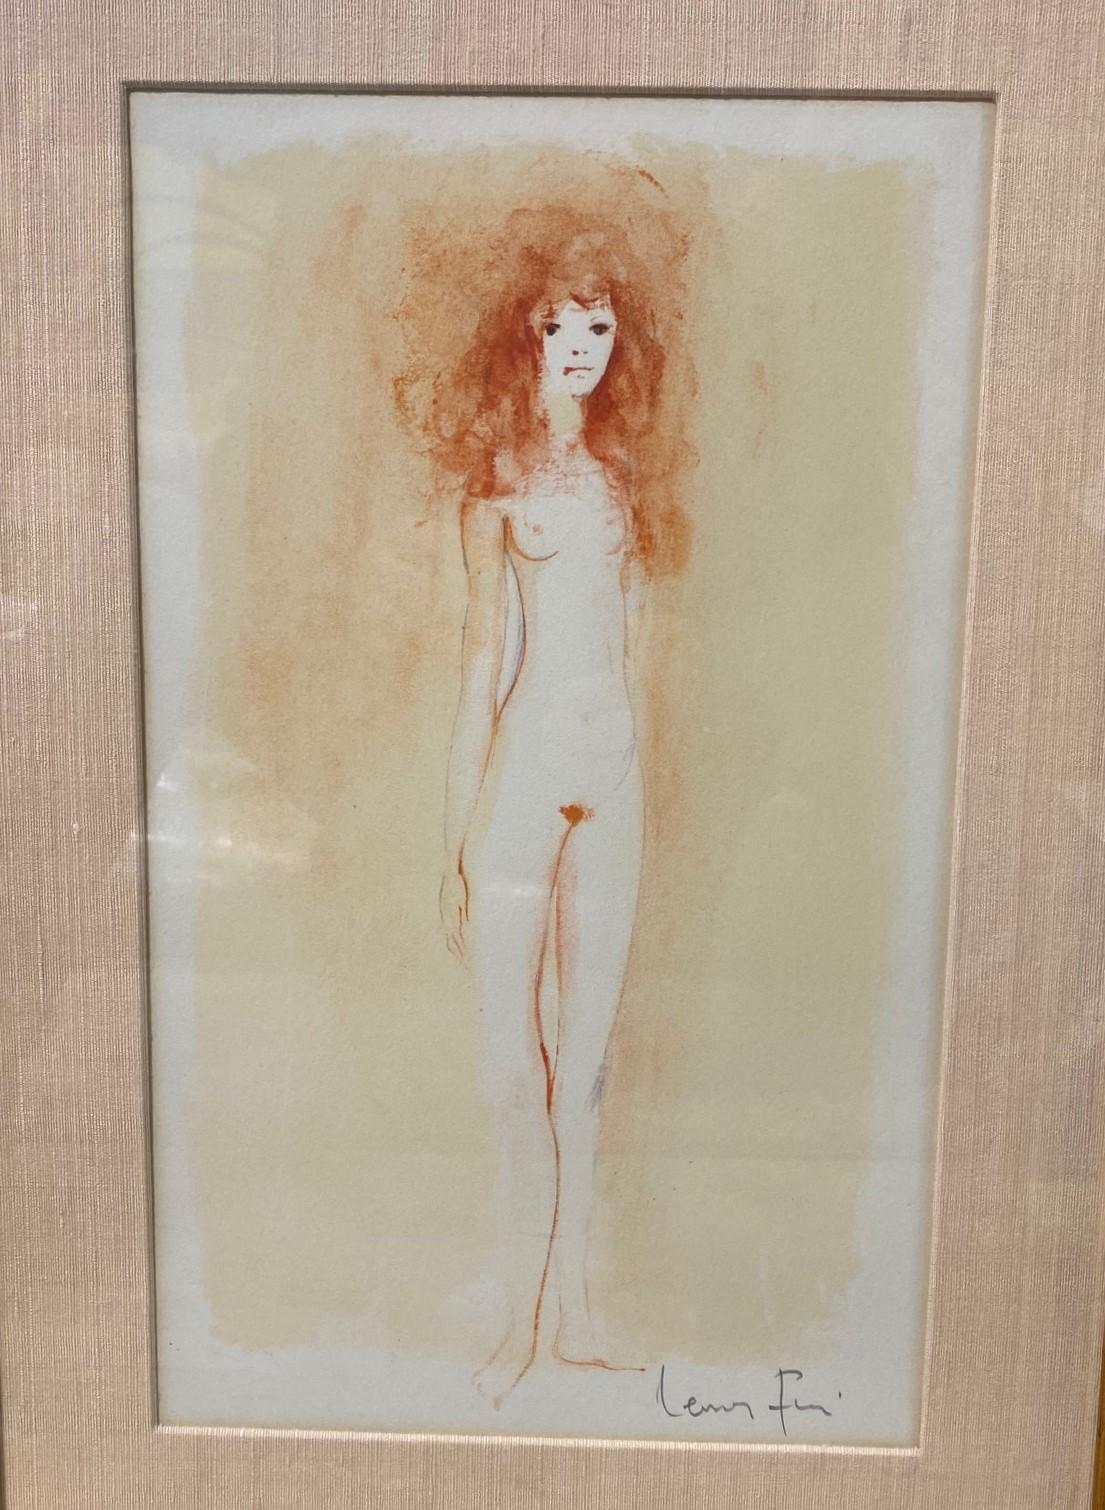 Mid-Century Modern Leonor Fini Signed Framed Lithograh Print Femme Avec Cheveux Rouge, circa 1970s For Sale